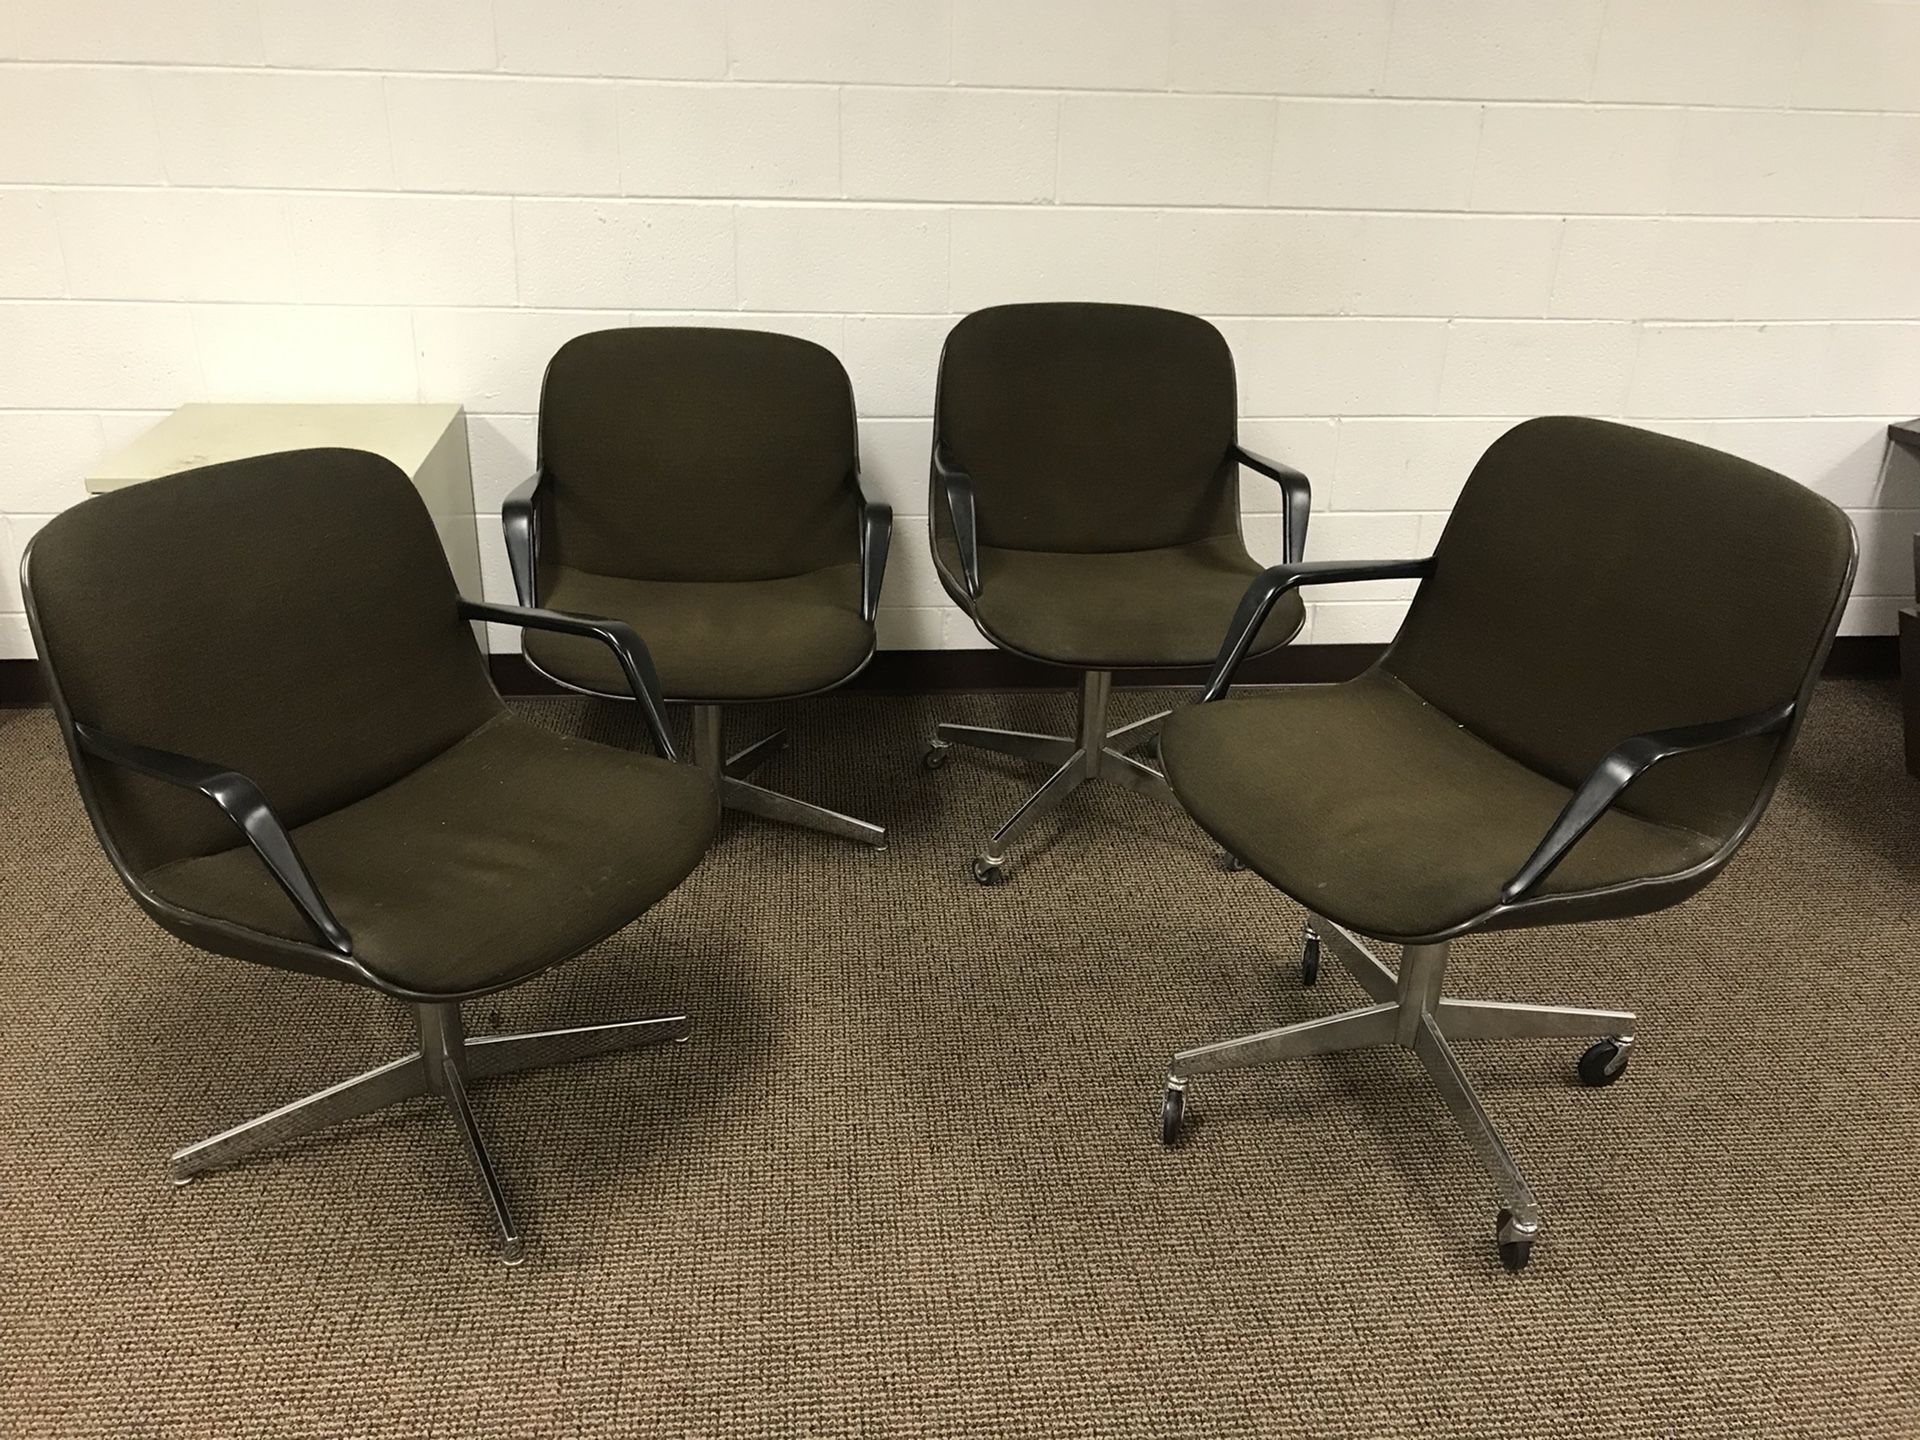 Steelcase Office Chairs 